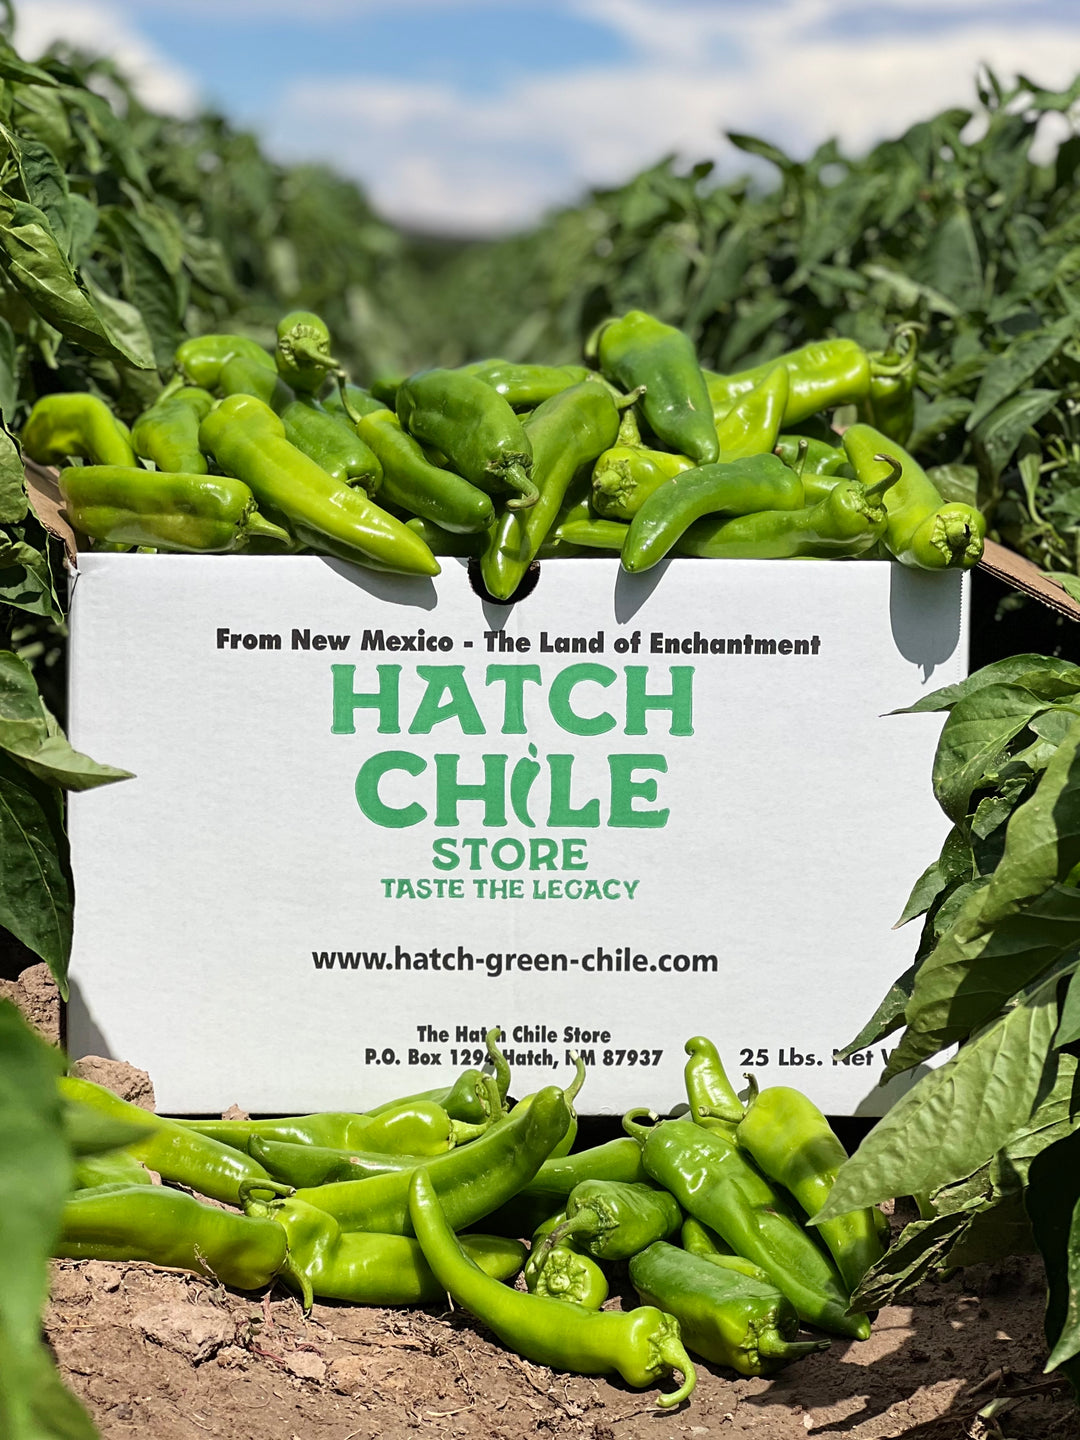 A box labeled "Fresh Hatch Green Chile - taste the legacy" overflowing with fresh green chiles, set amid lush chile plants under a bright sky.